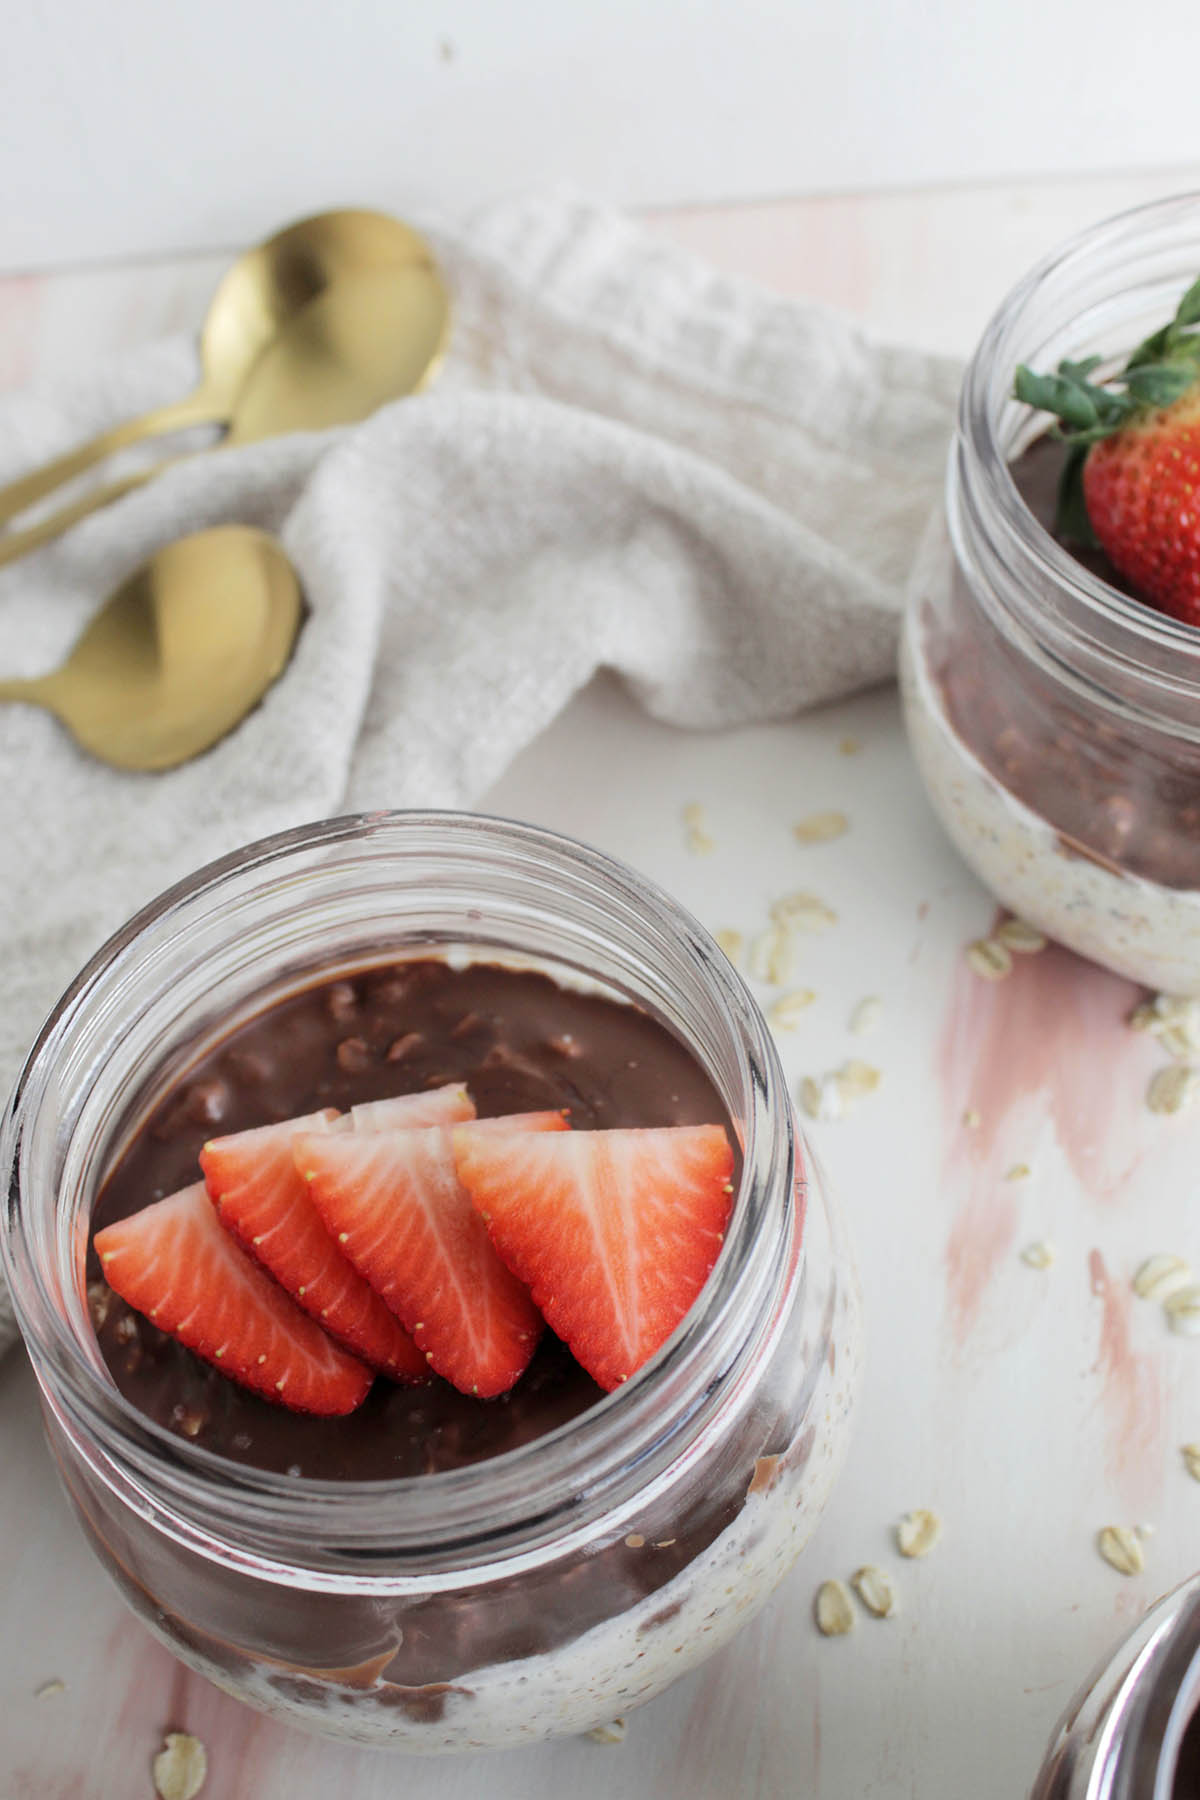 overnight oats topped with chocolate and sliced strawberries.